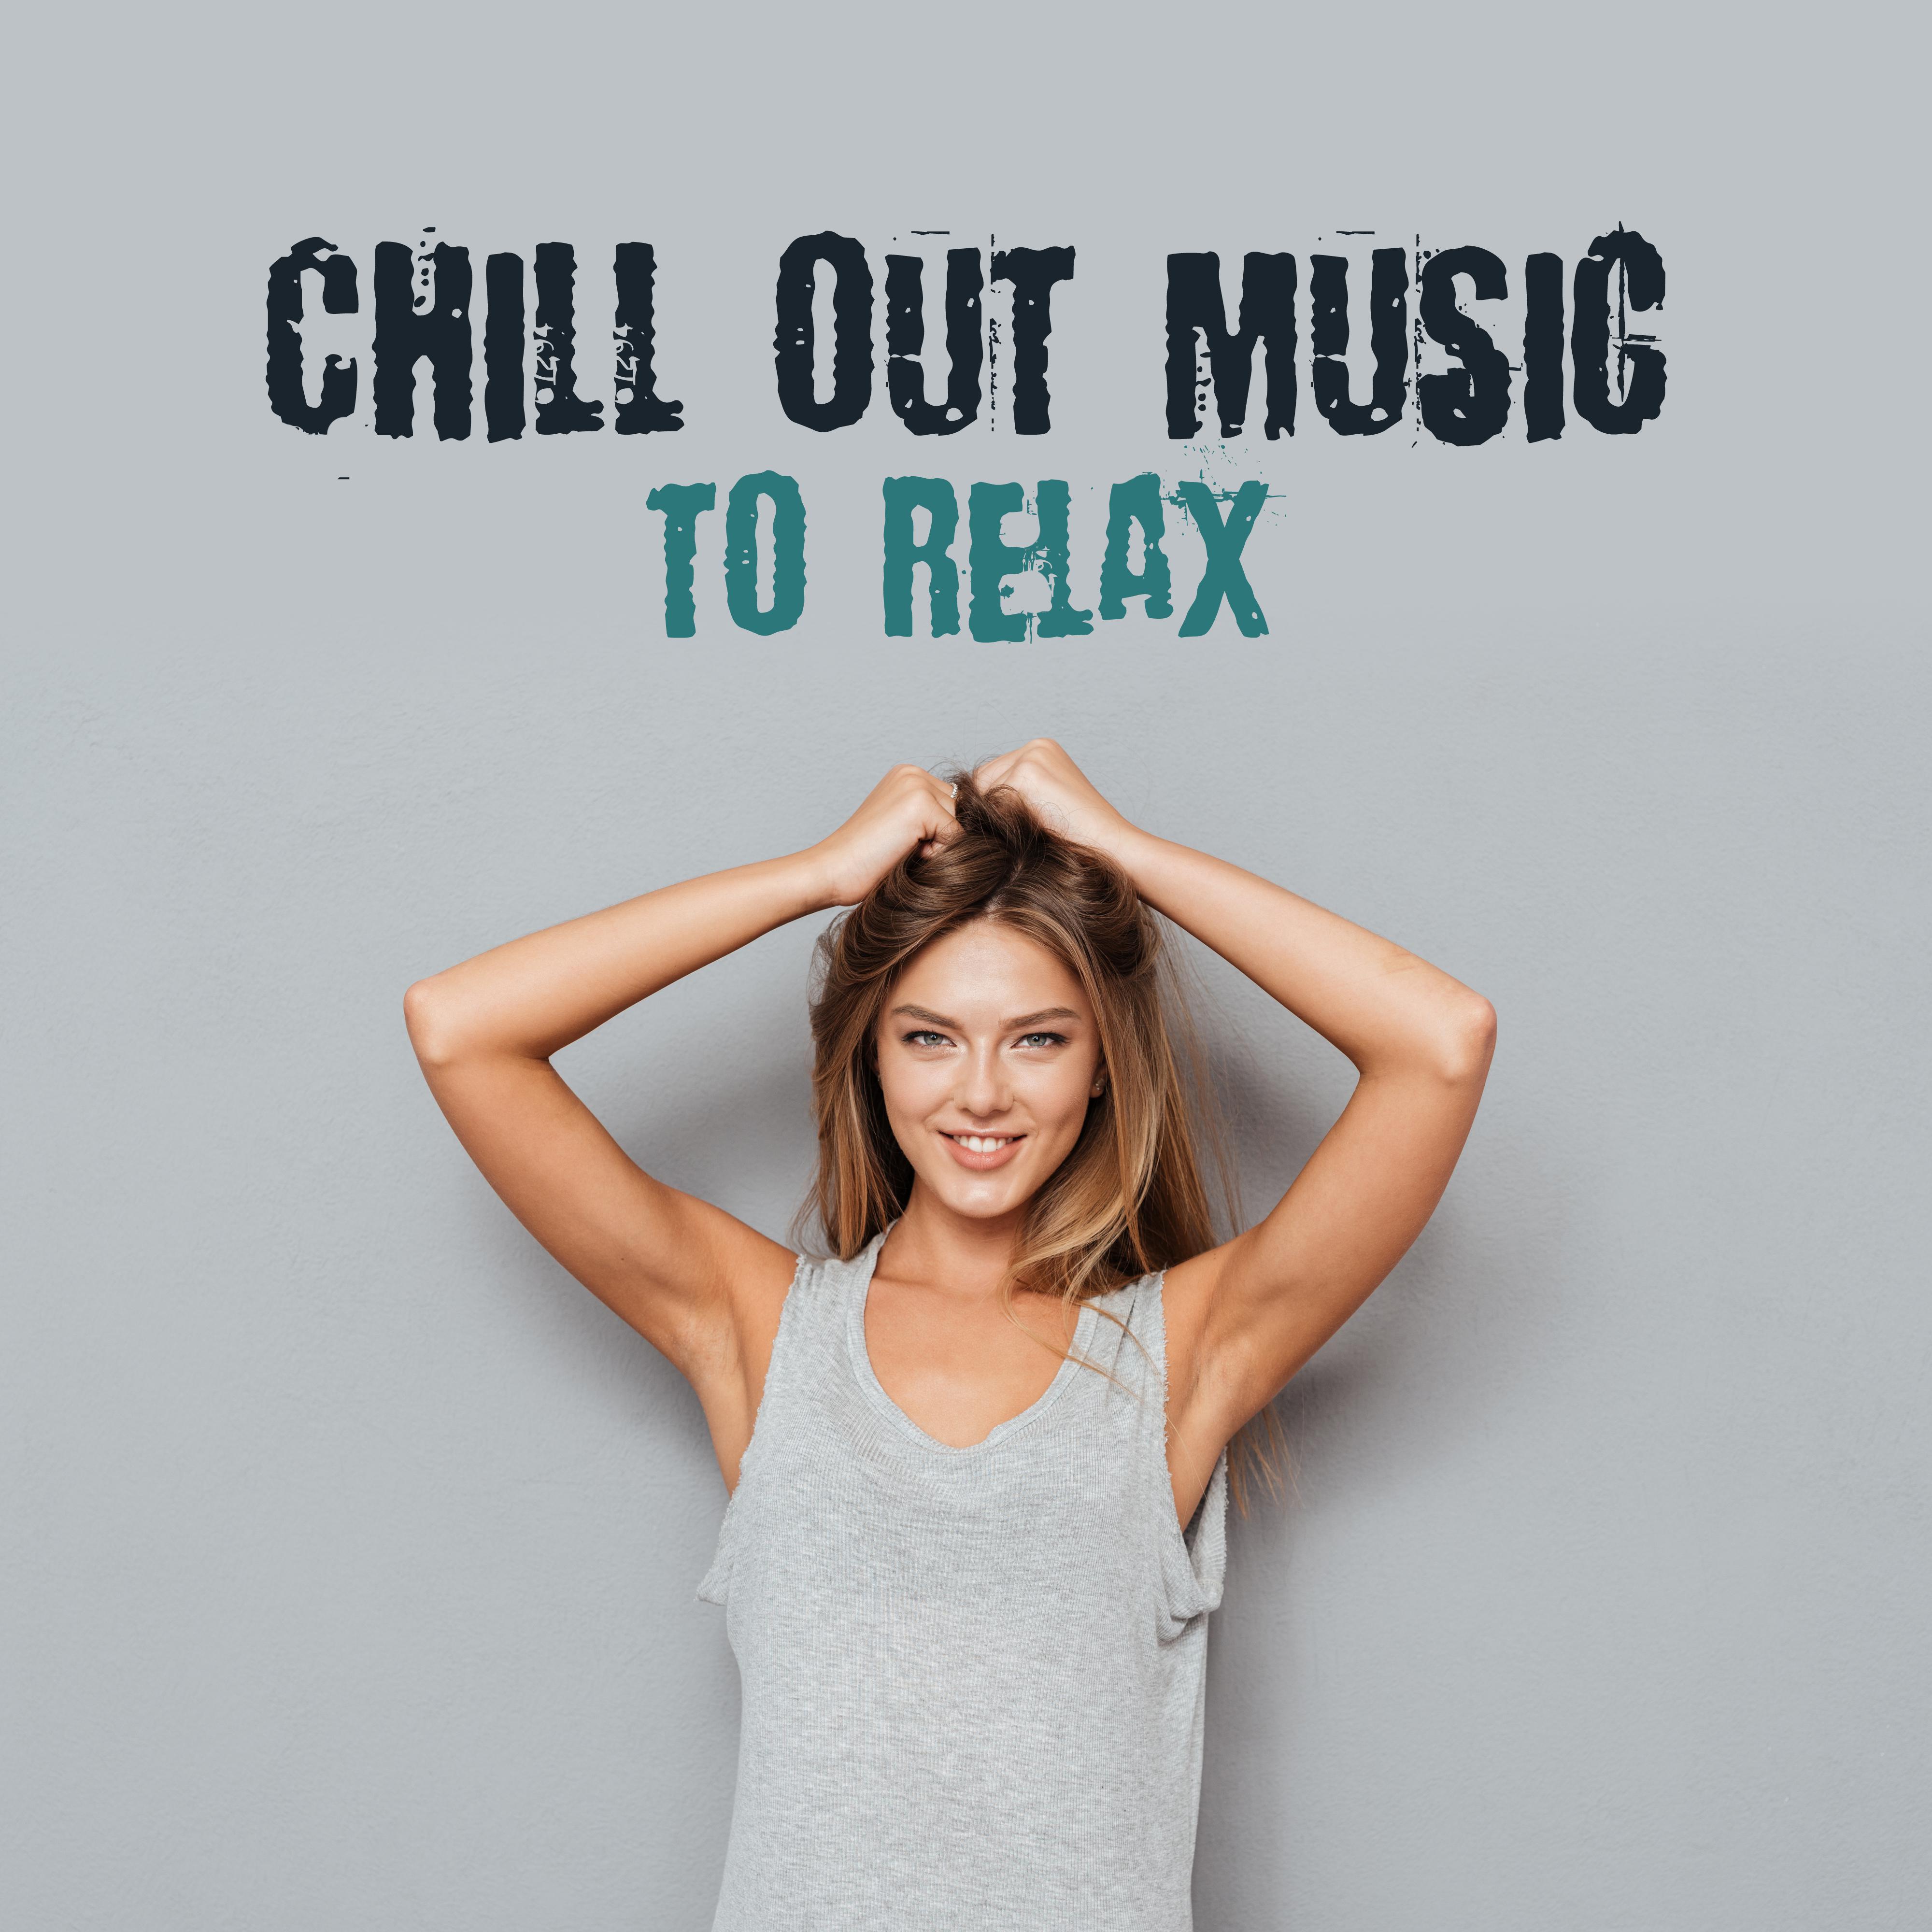 Chill Out Music to Relax  Best Sounds to Calm Down, Chill Out Relaxation, Inner Calmness, Summer Beats to Rest